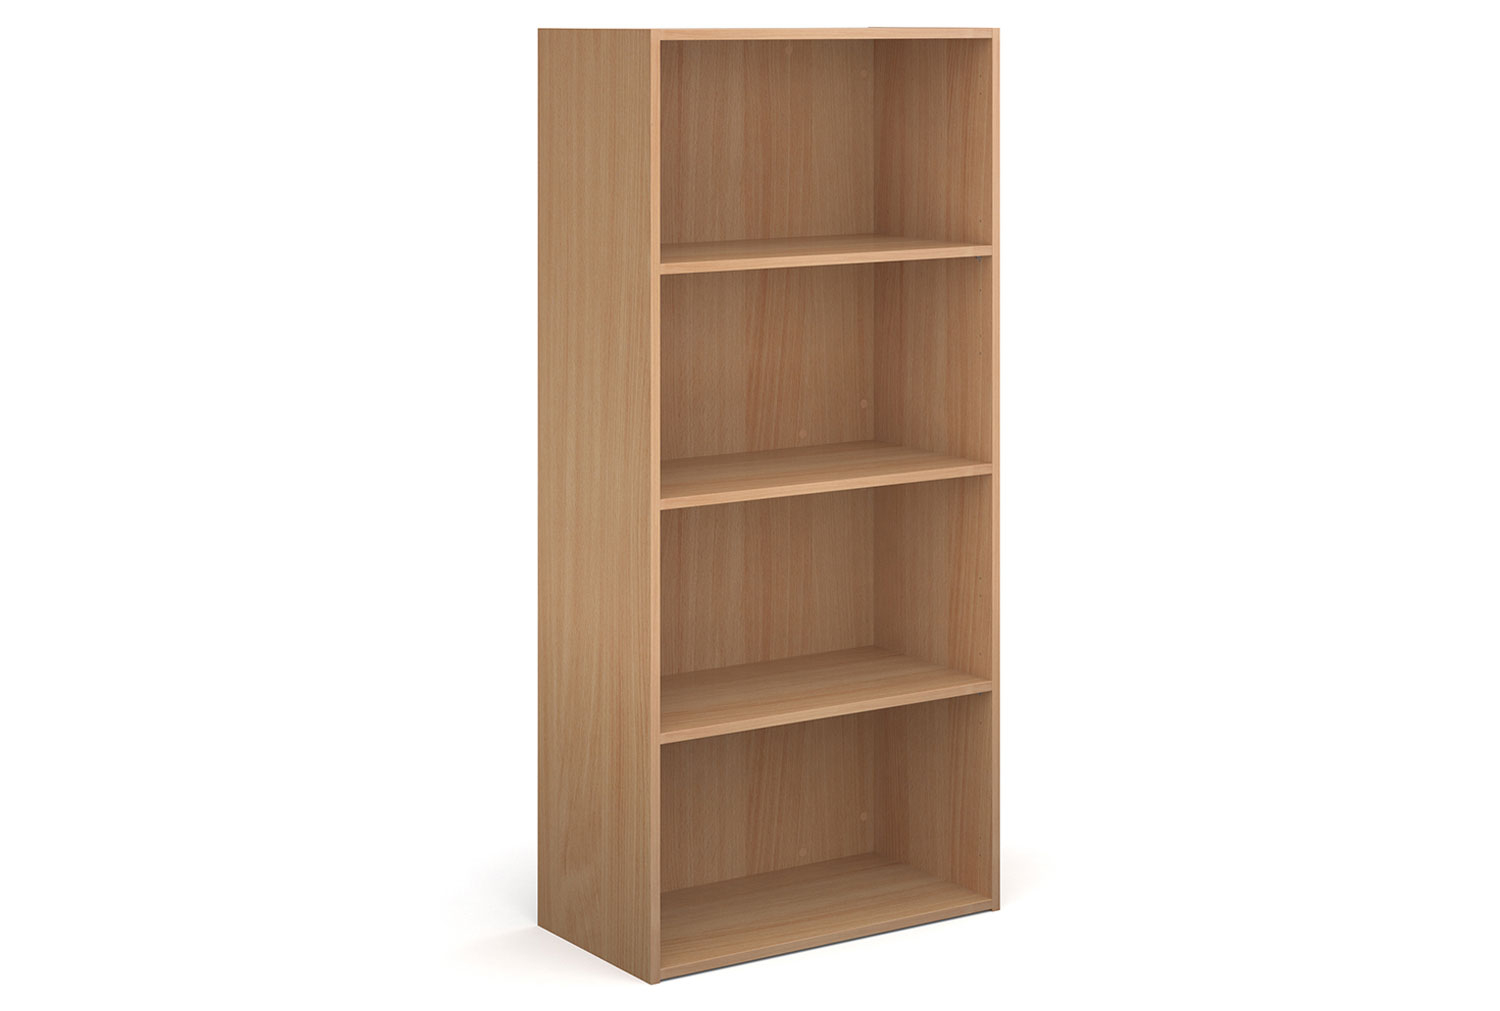 Value Line Classic+ Office Bookcases, 3 Shelf - 76wx39dx163h (cm), Beech, Express Delivery